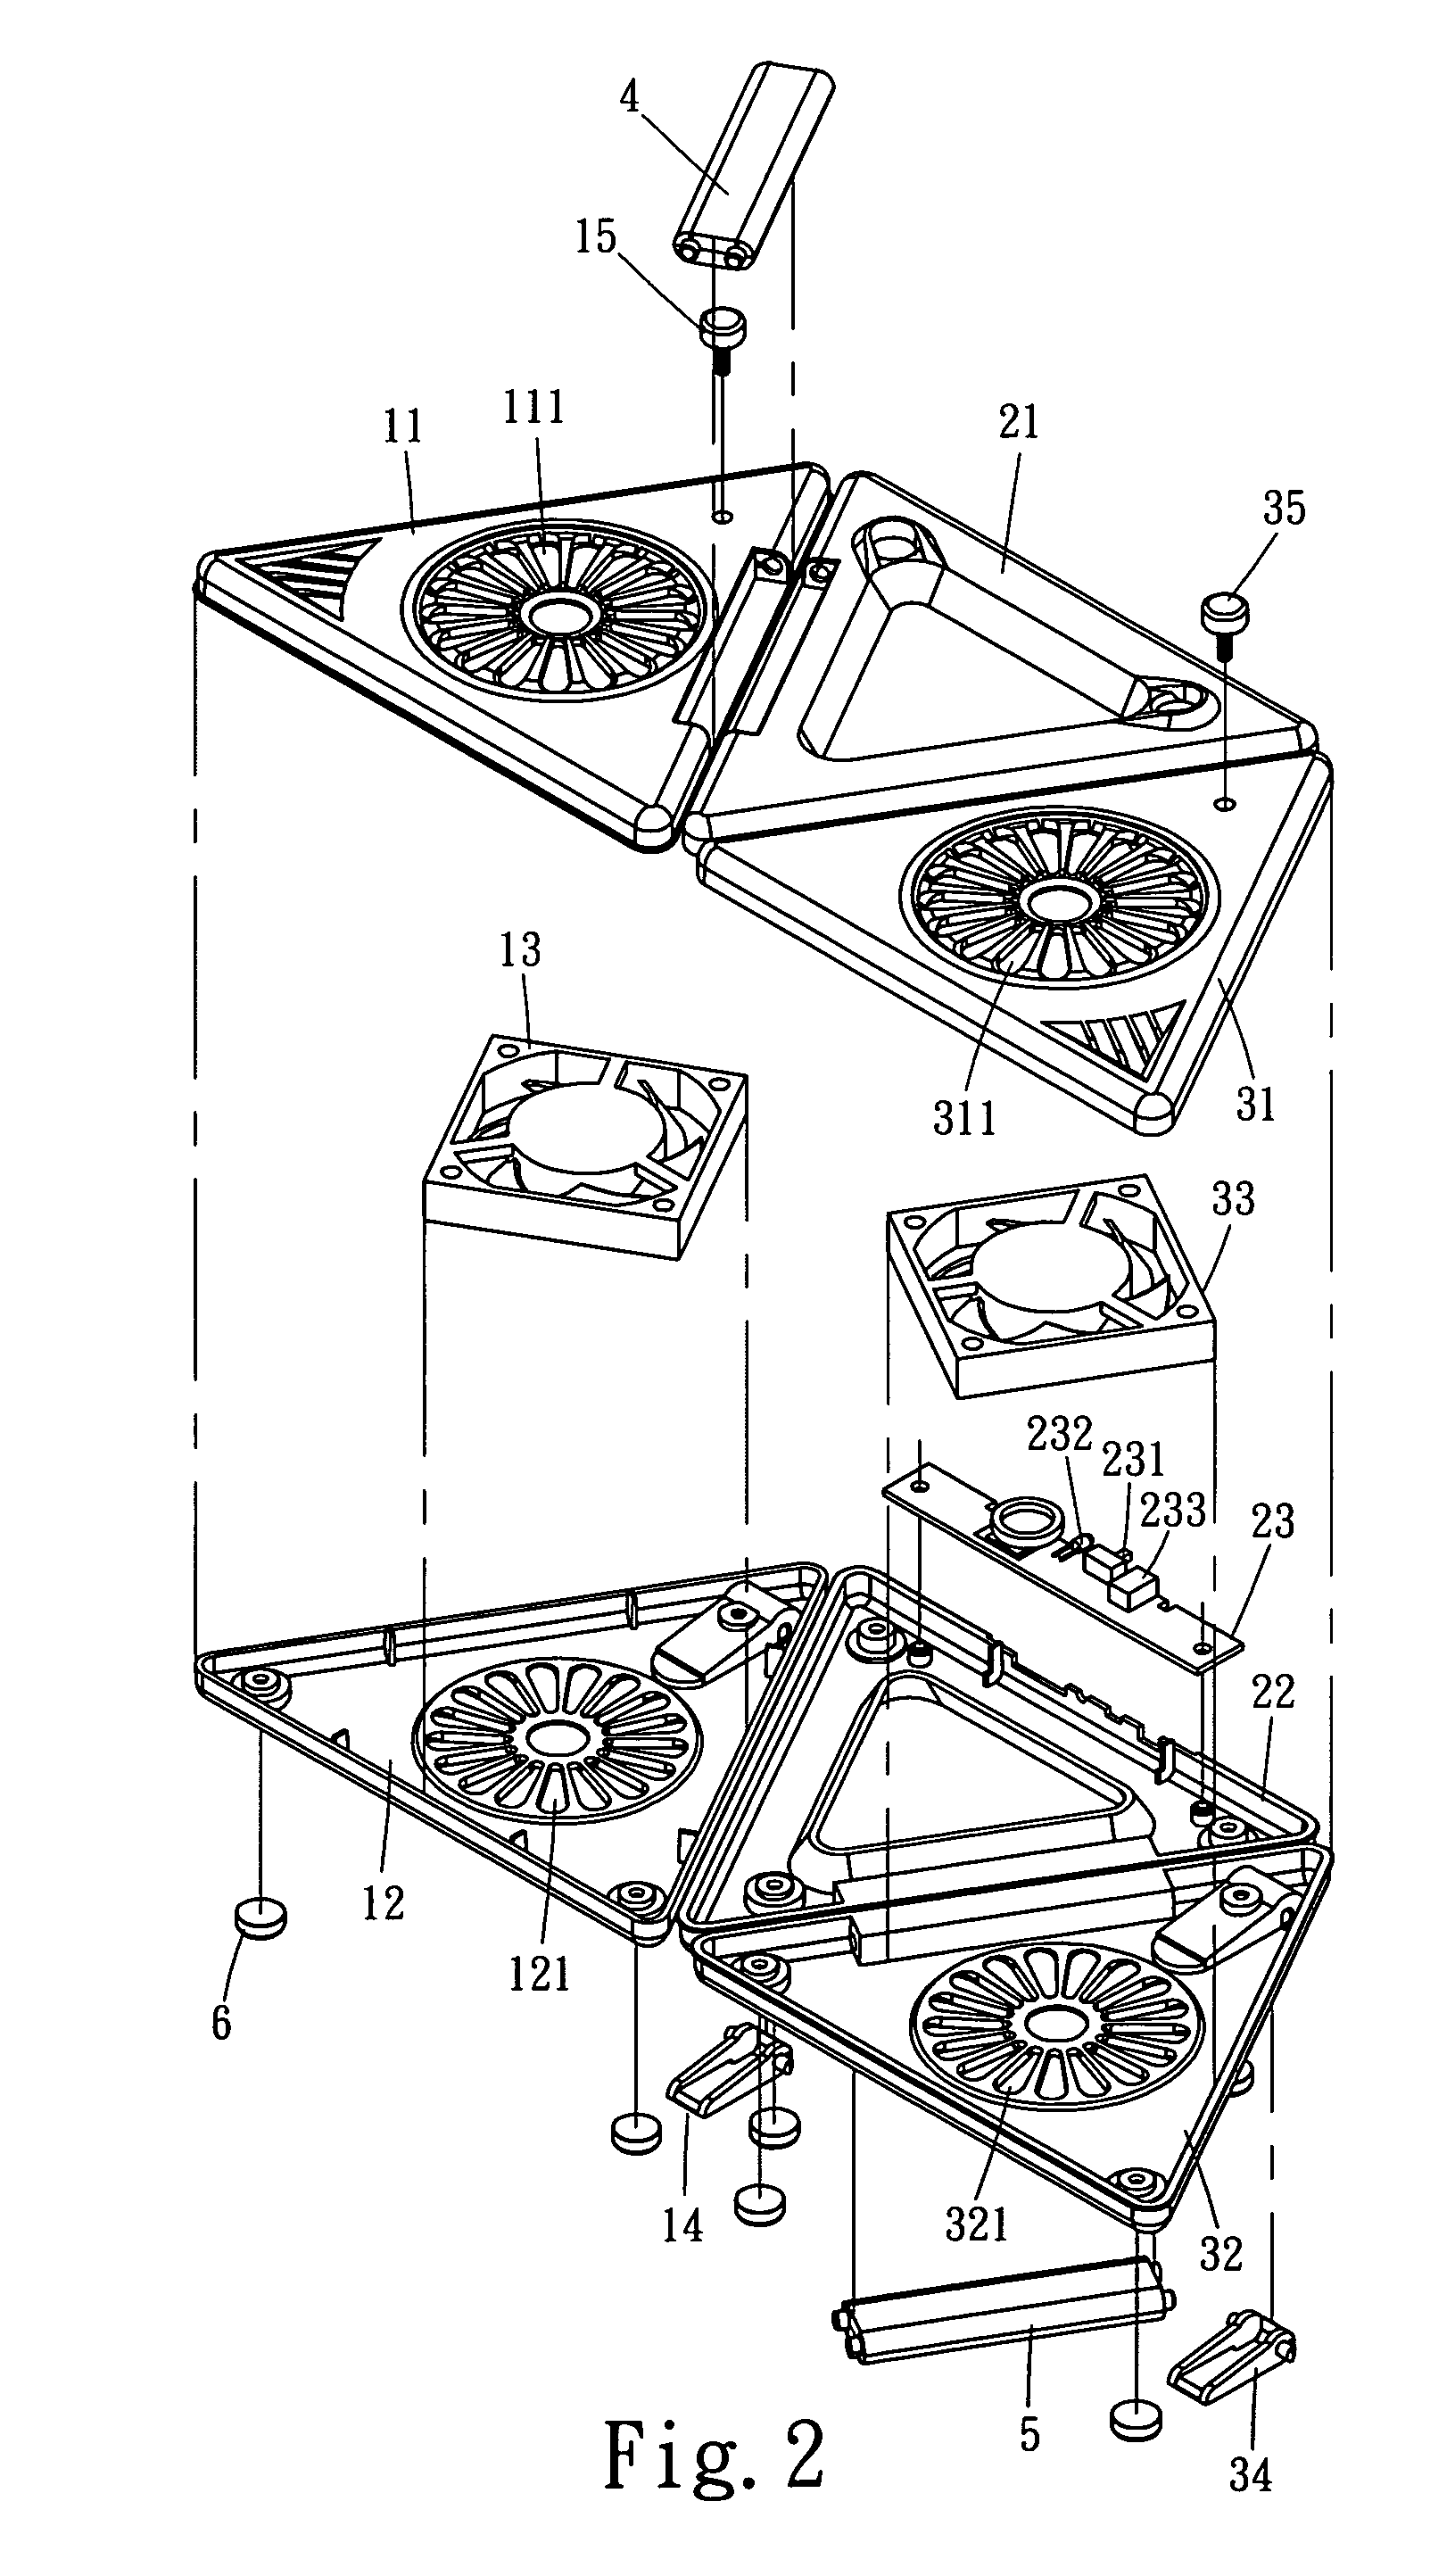 Portable folding heat-sink assembly for notebook computer